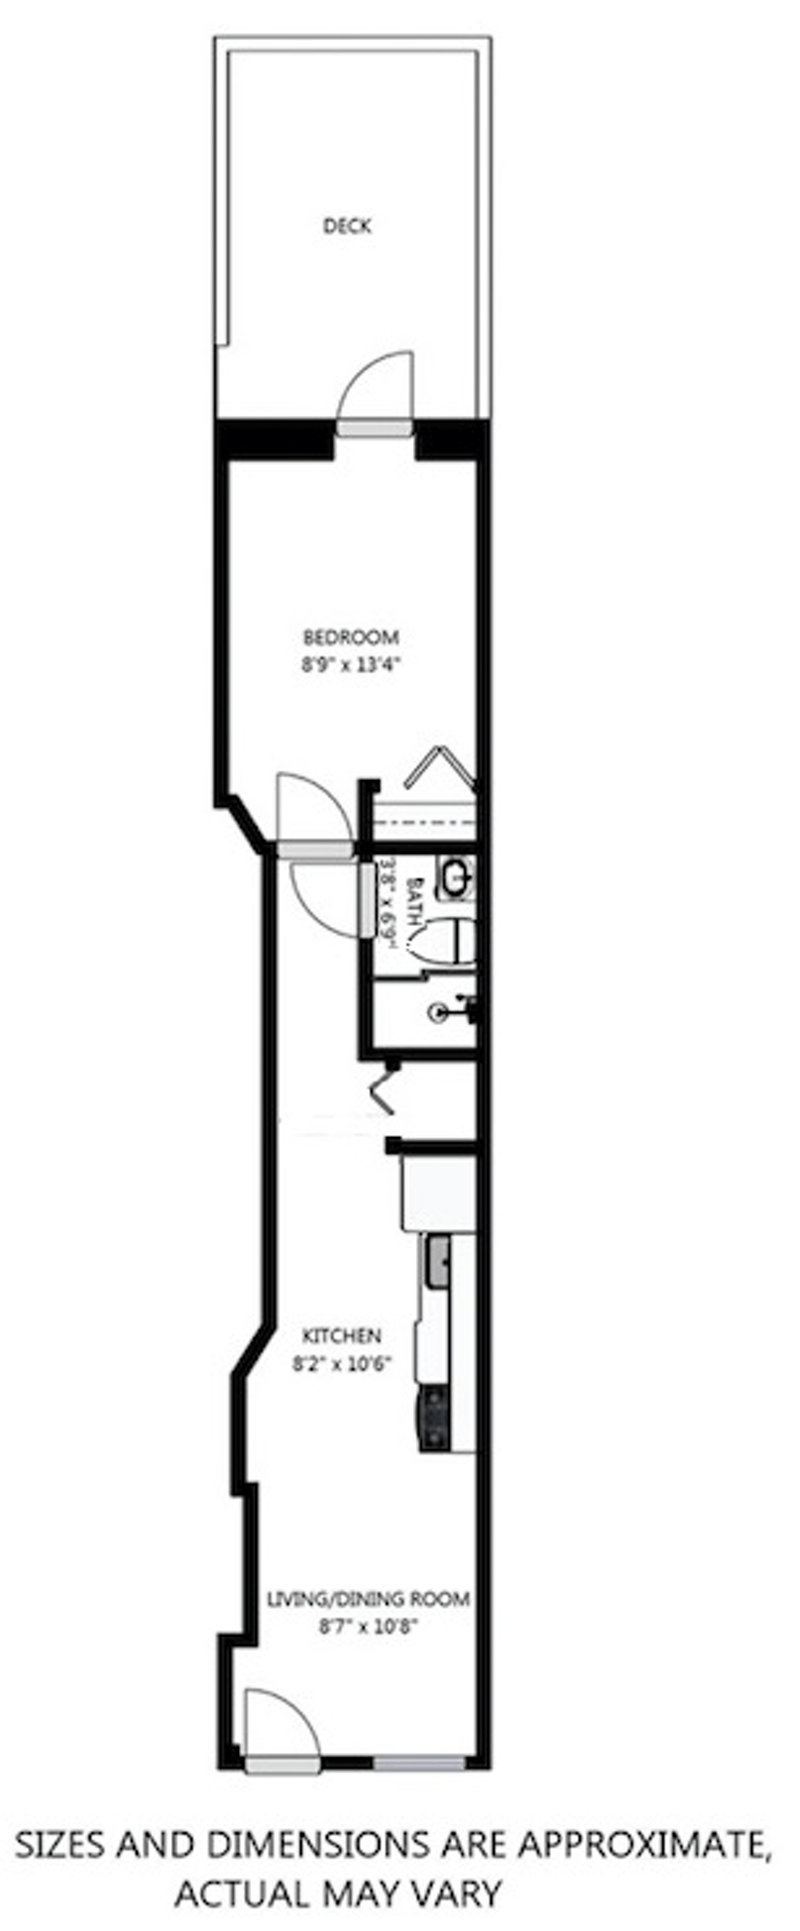 Floorplan for 120 Willow Ave, 1R